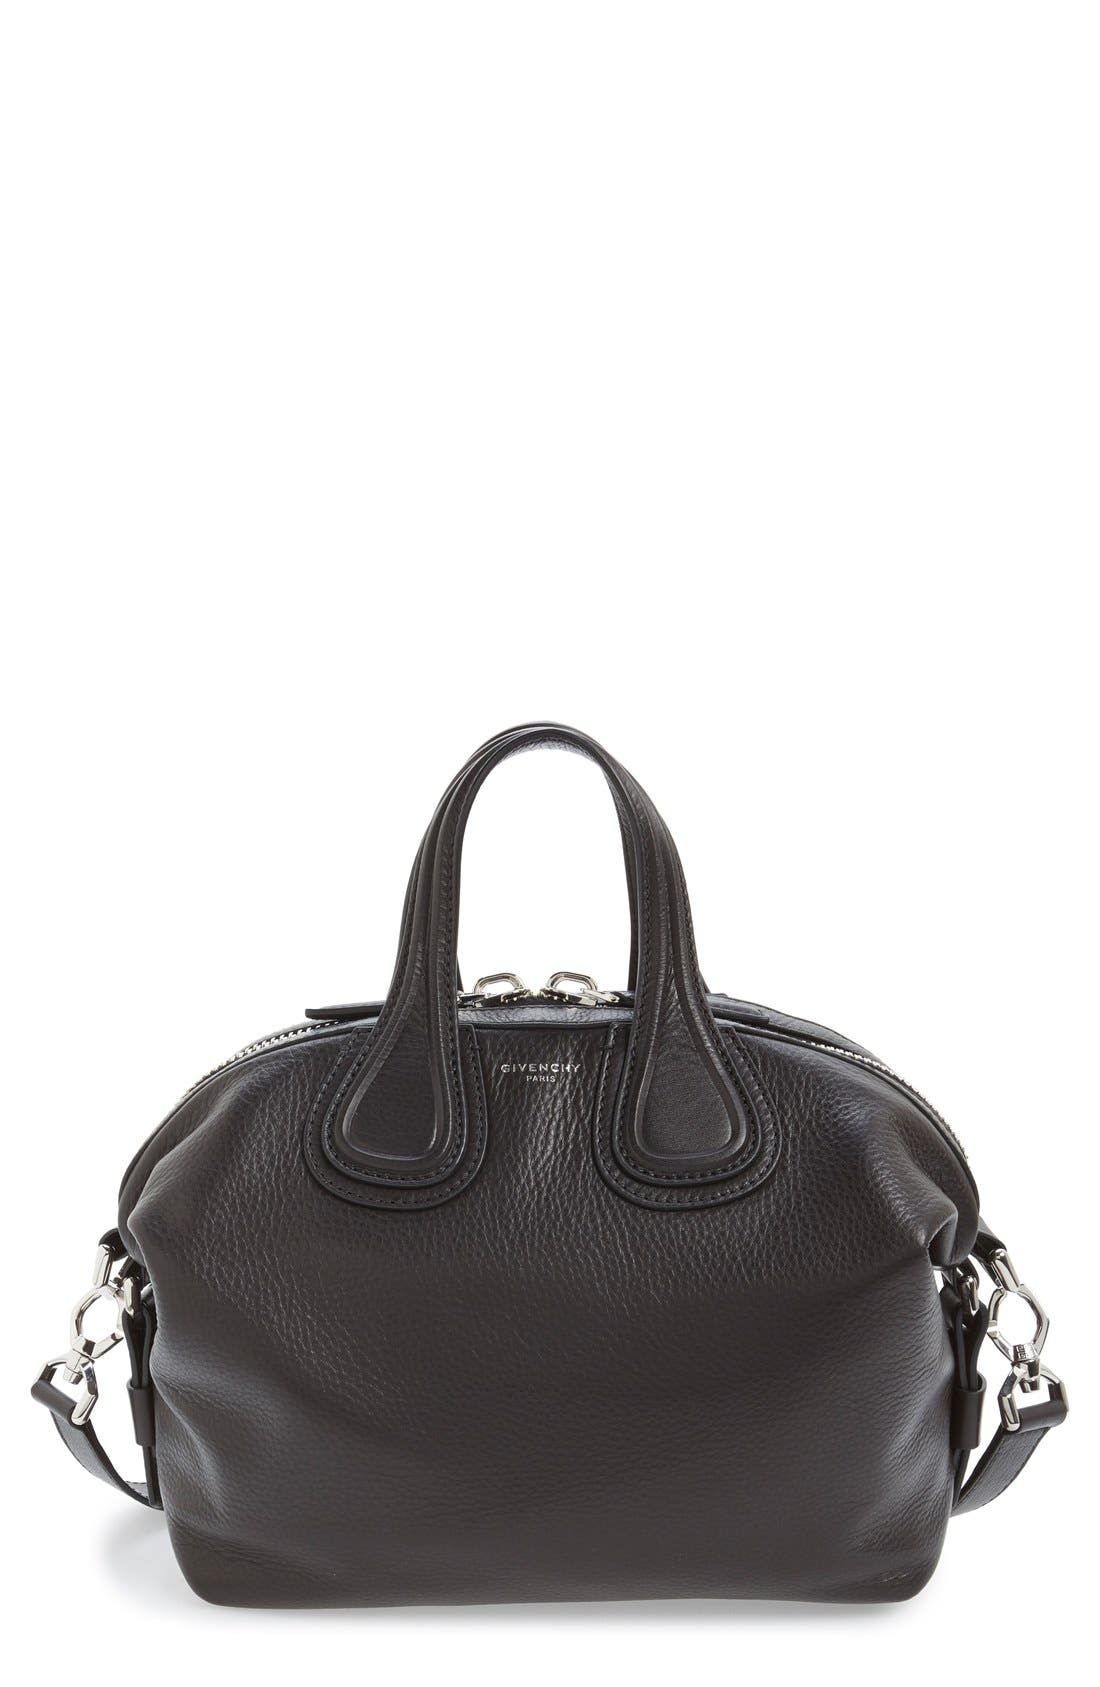 givenchy nightingale review